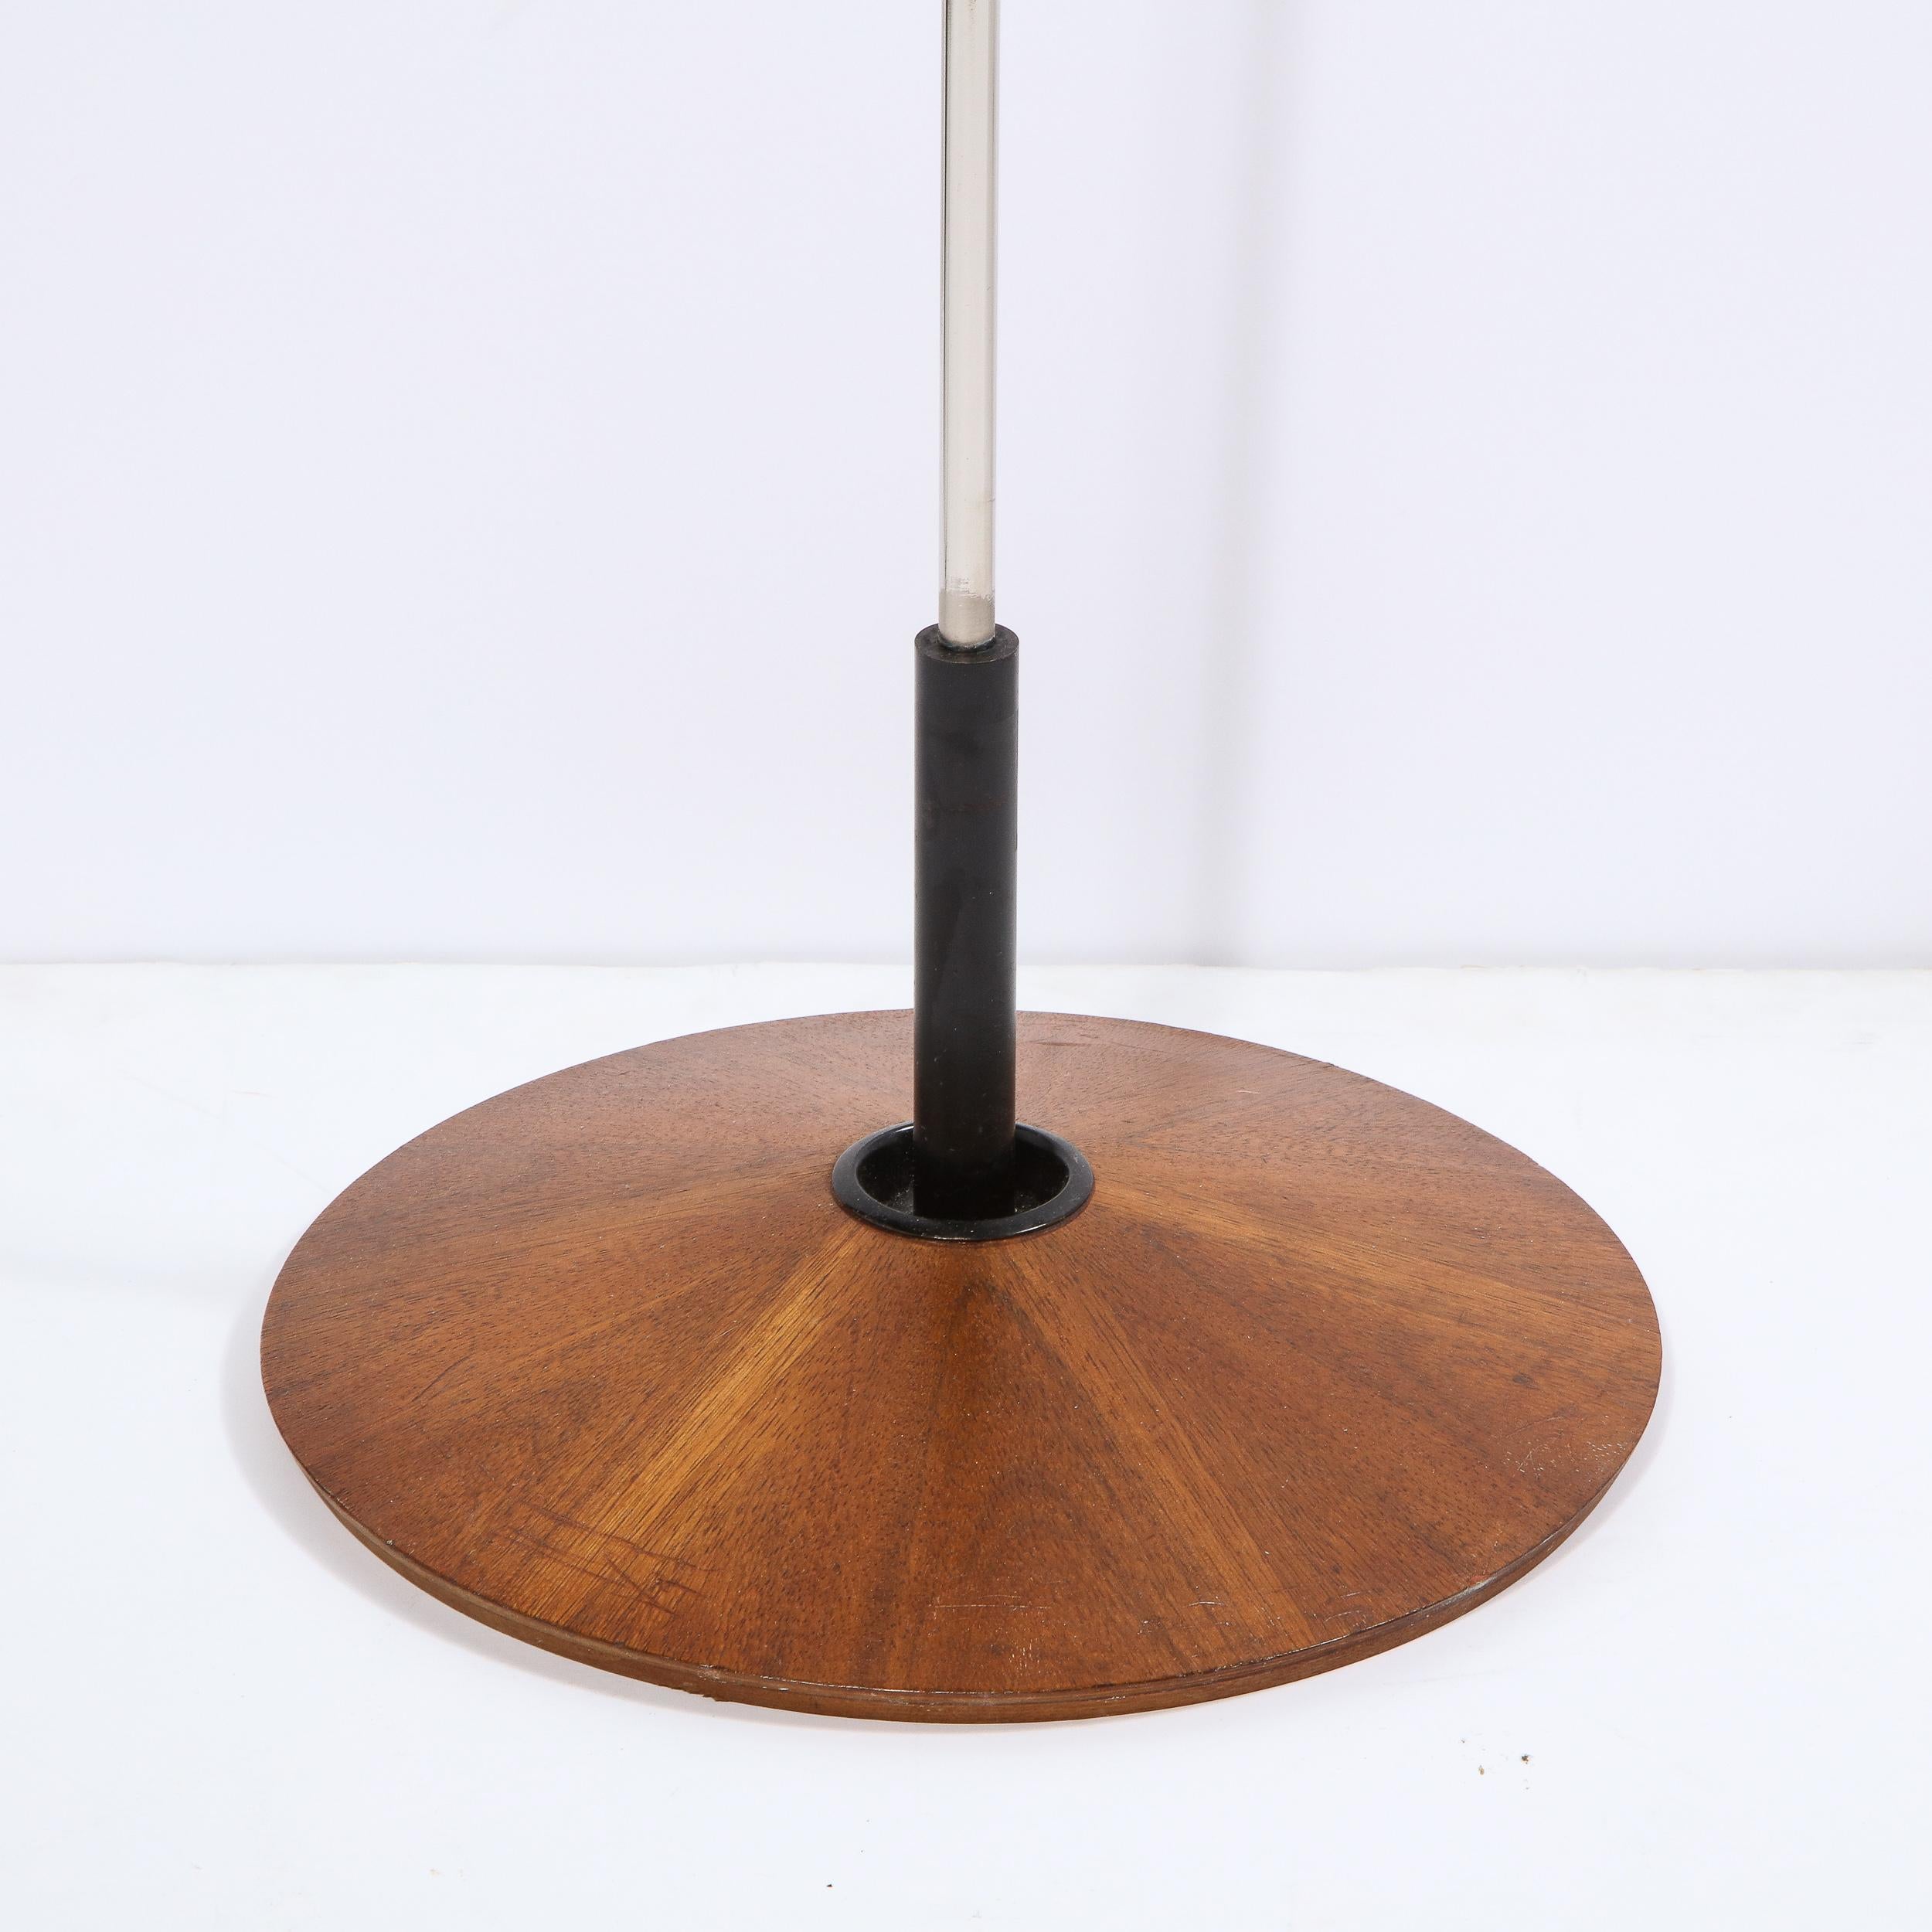 This refined Mid-Century Modern rosewood and chrome floor lamp was designed by Georges Frydman for Temde Leuchten in Switzerland, circa 1960. The piece offers a bookmatched rosewood veneer circular base from which a cylindrical chrome body ascends